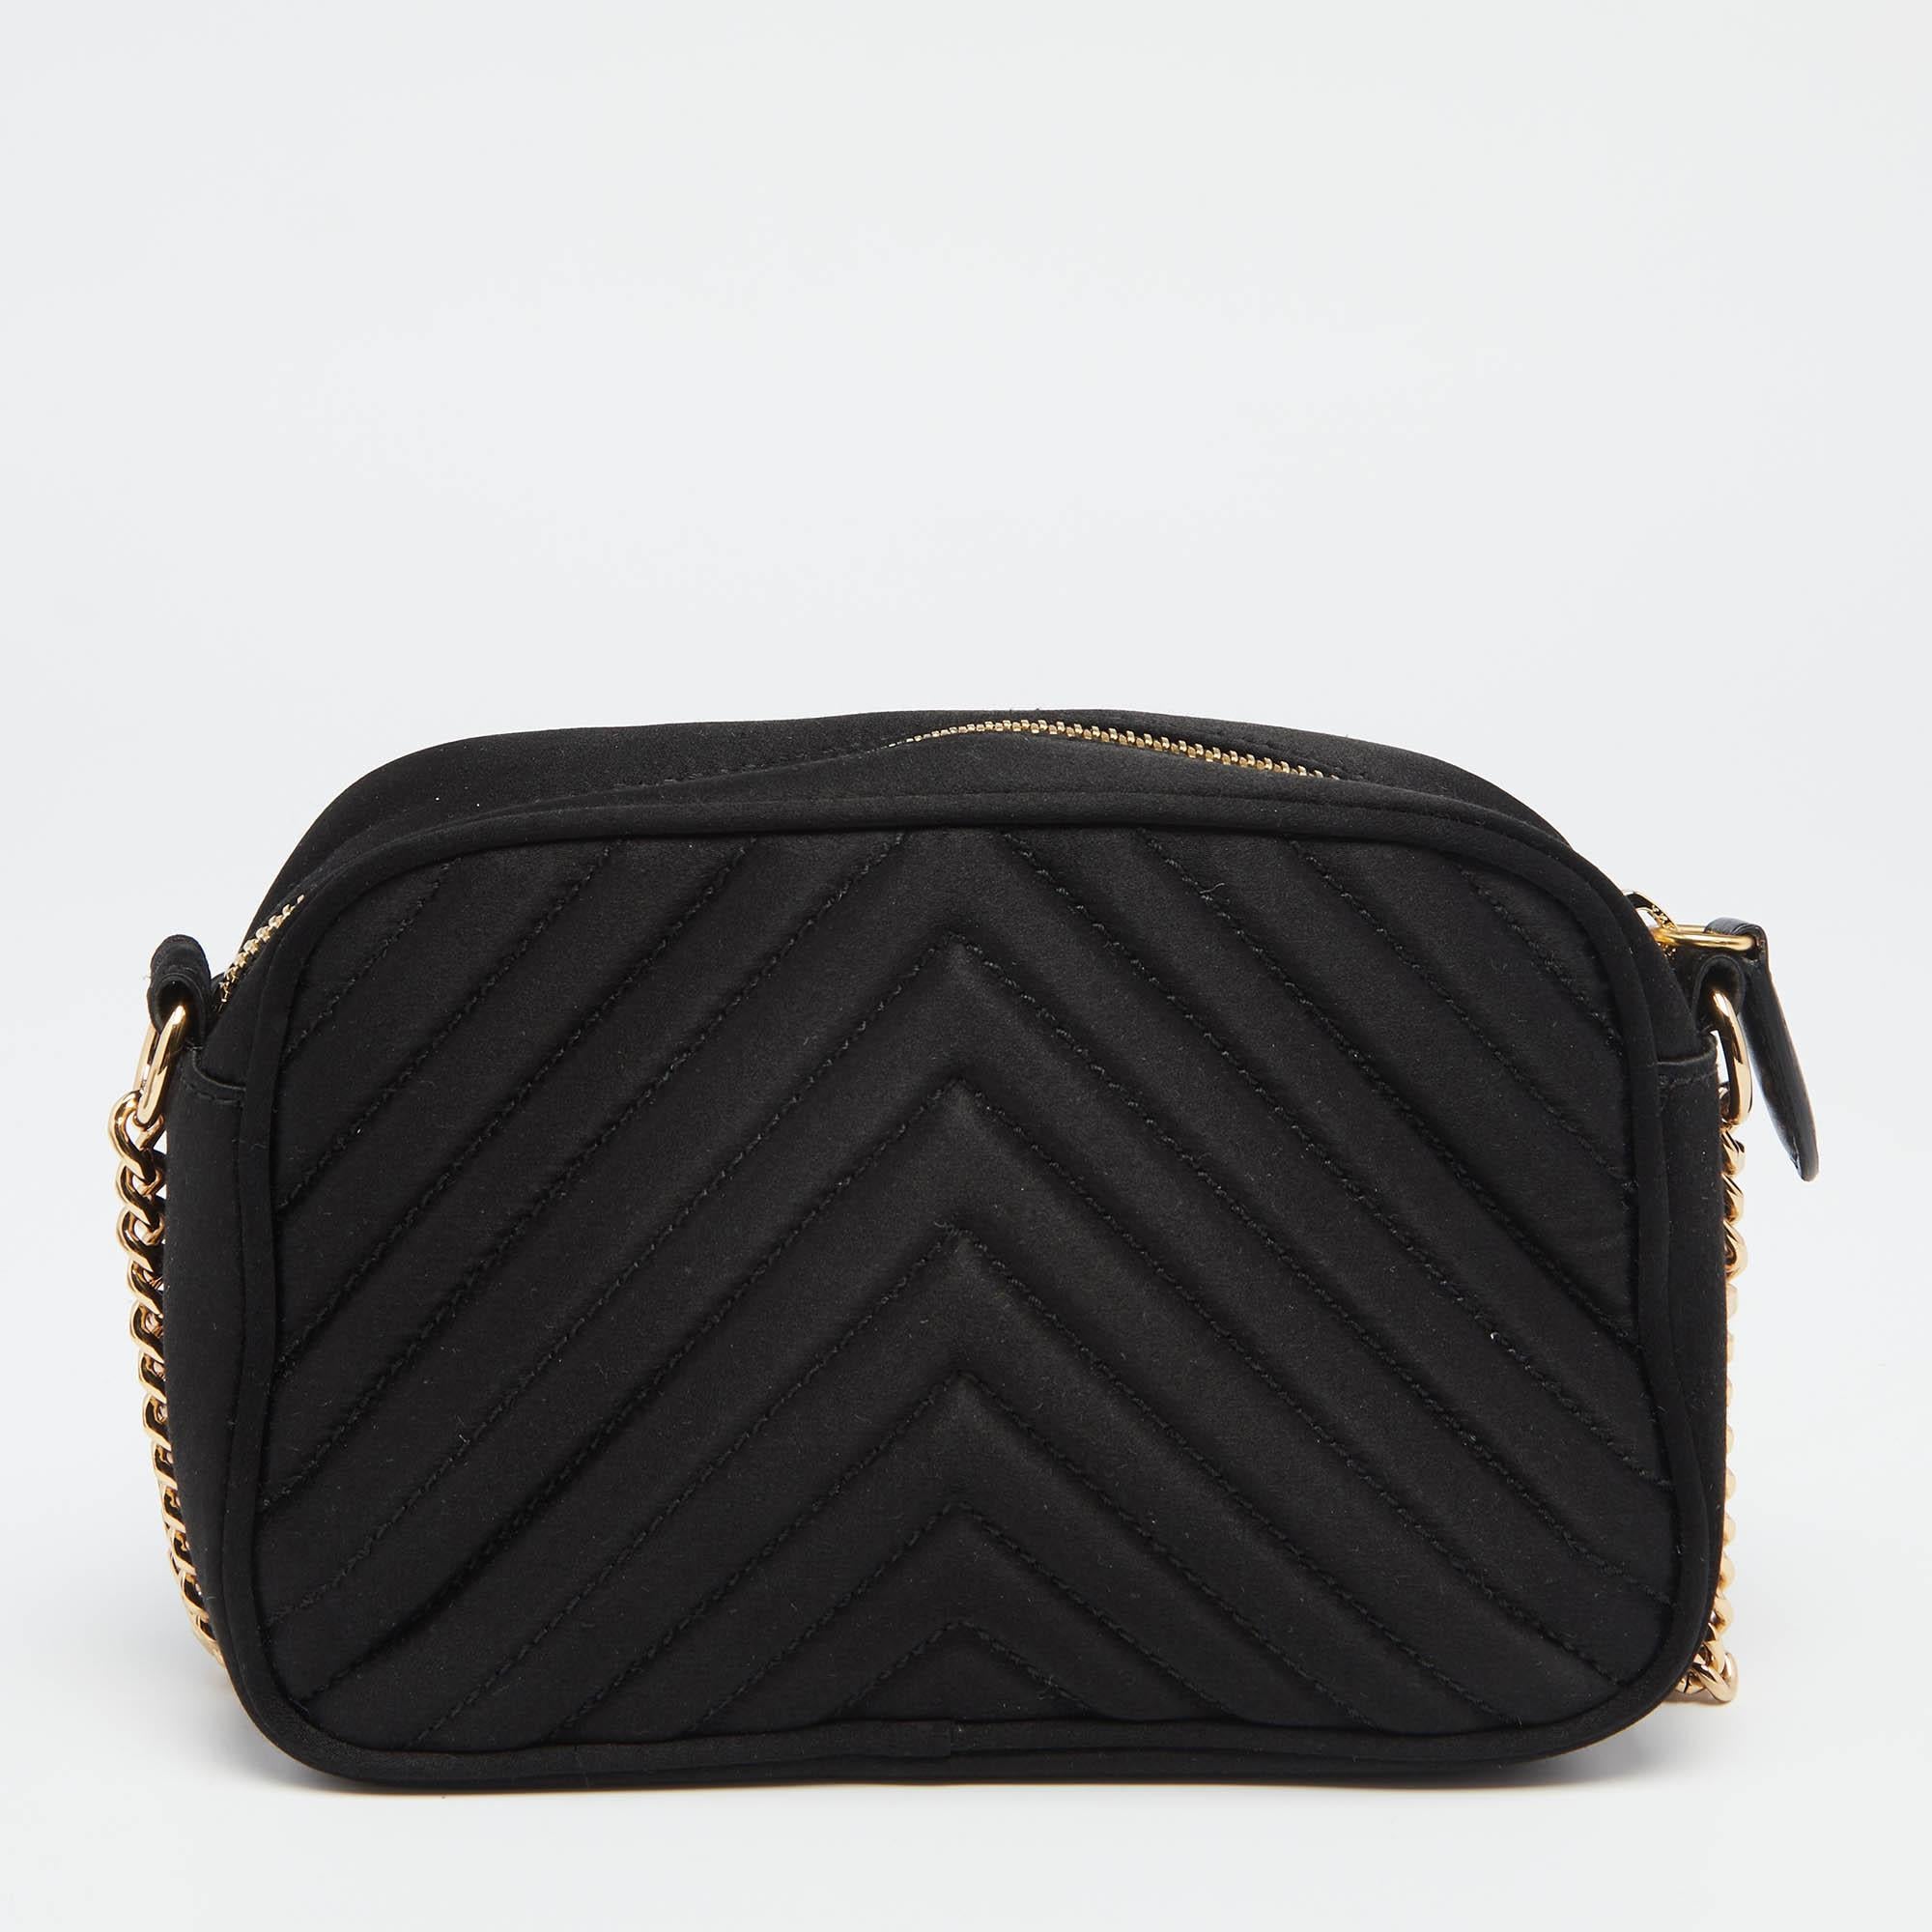 Coming from the House of Stella McCartney, this Stella Star crossbody bag will help your style sparkle! It is made from black quilted satin and comes with a gold-toned star motif embellishment on the front elevated by chains. It has an